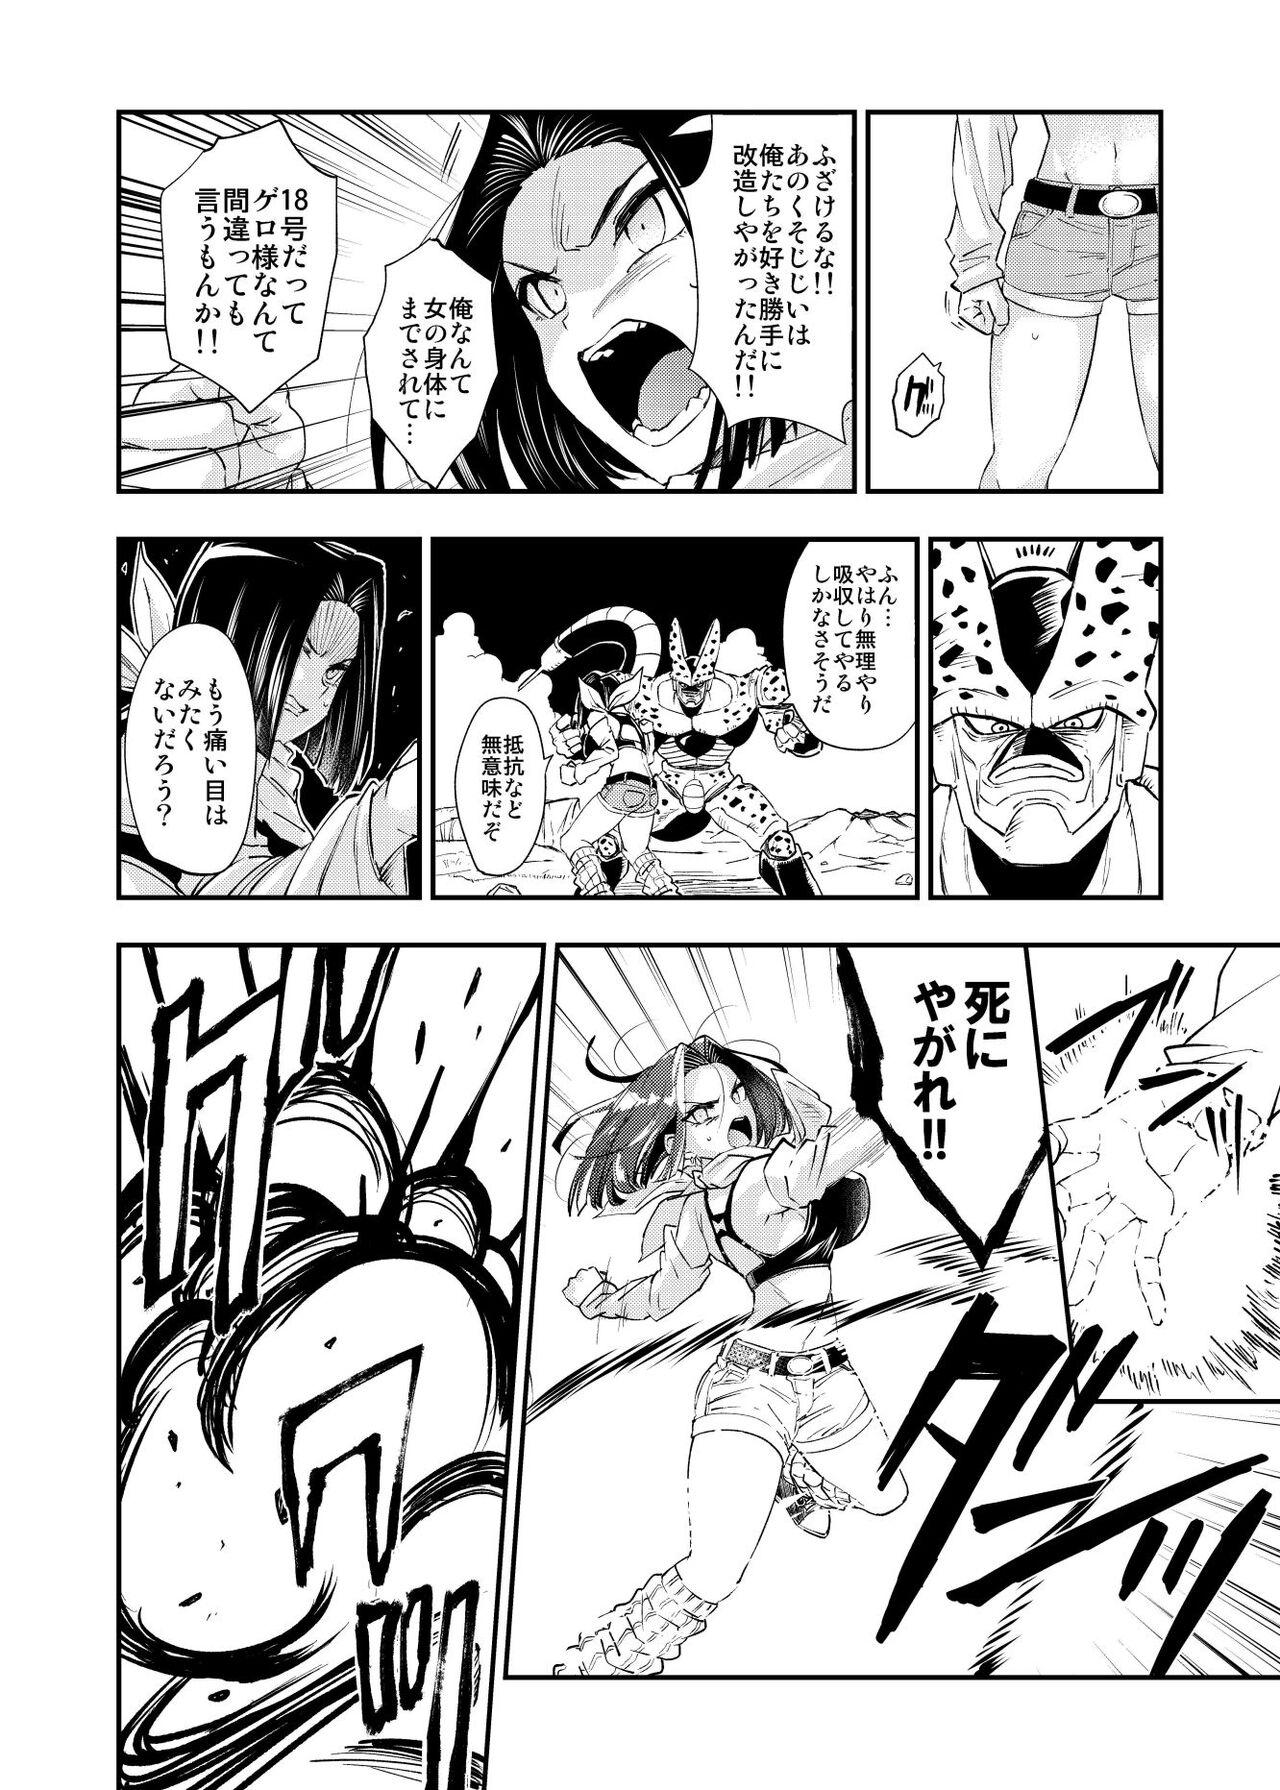 Spooning Cell no Esa - Dragon ball z Load - Page 11